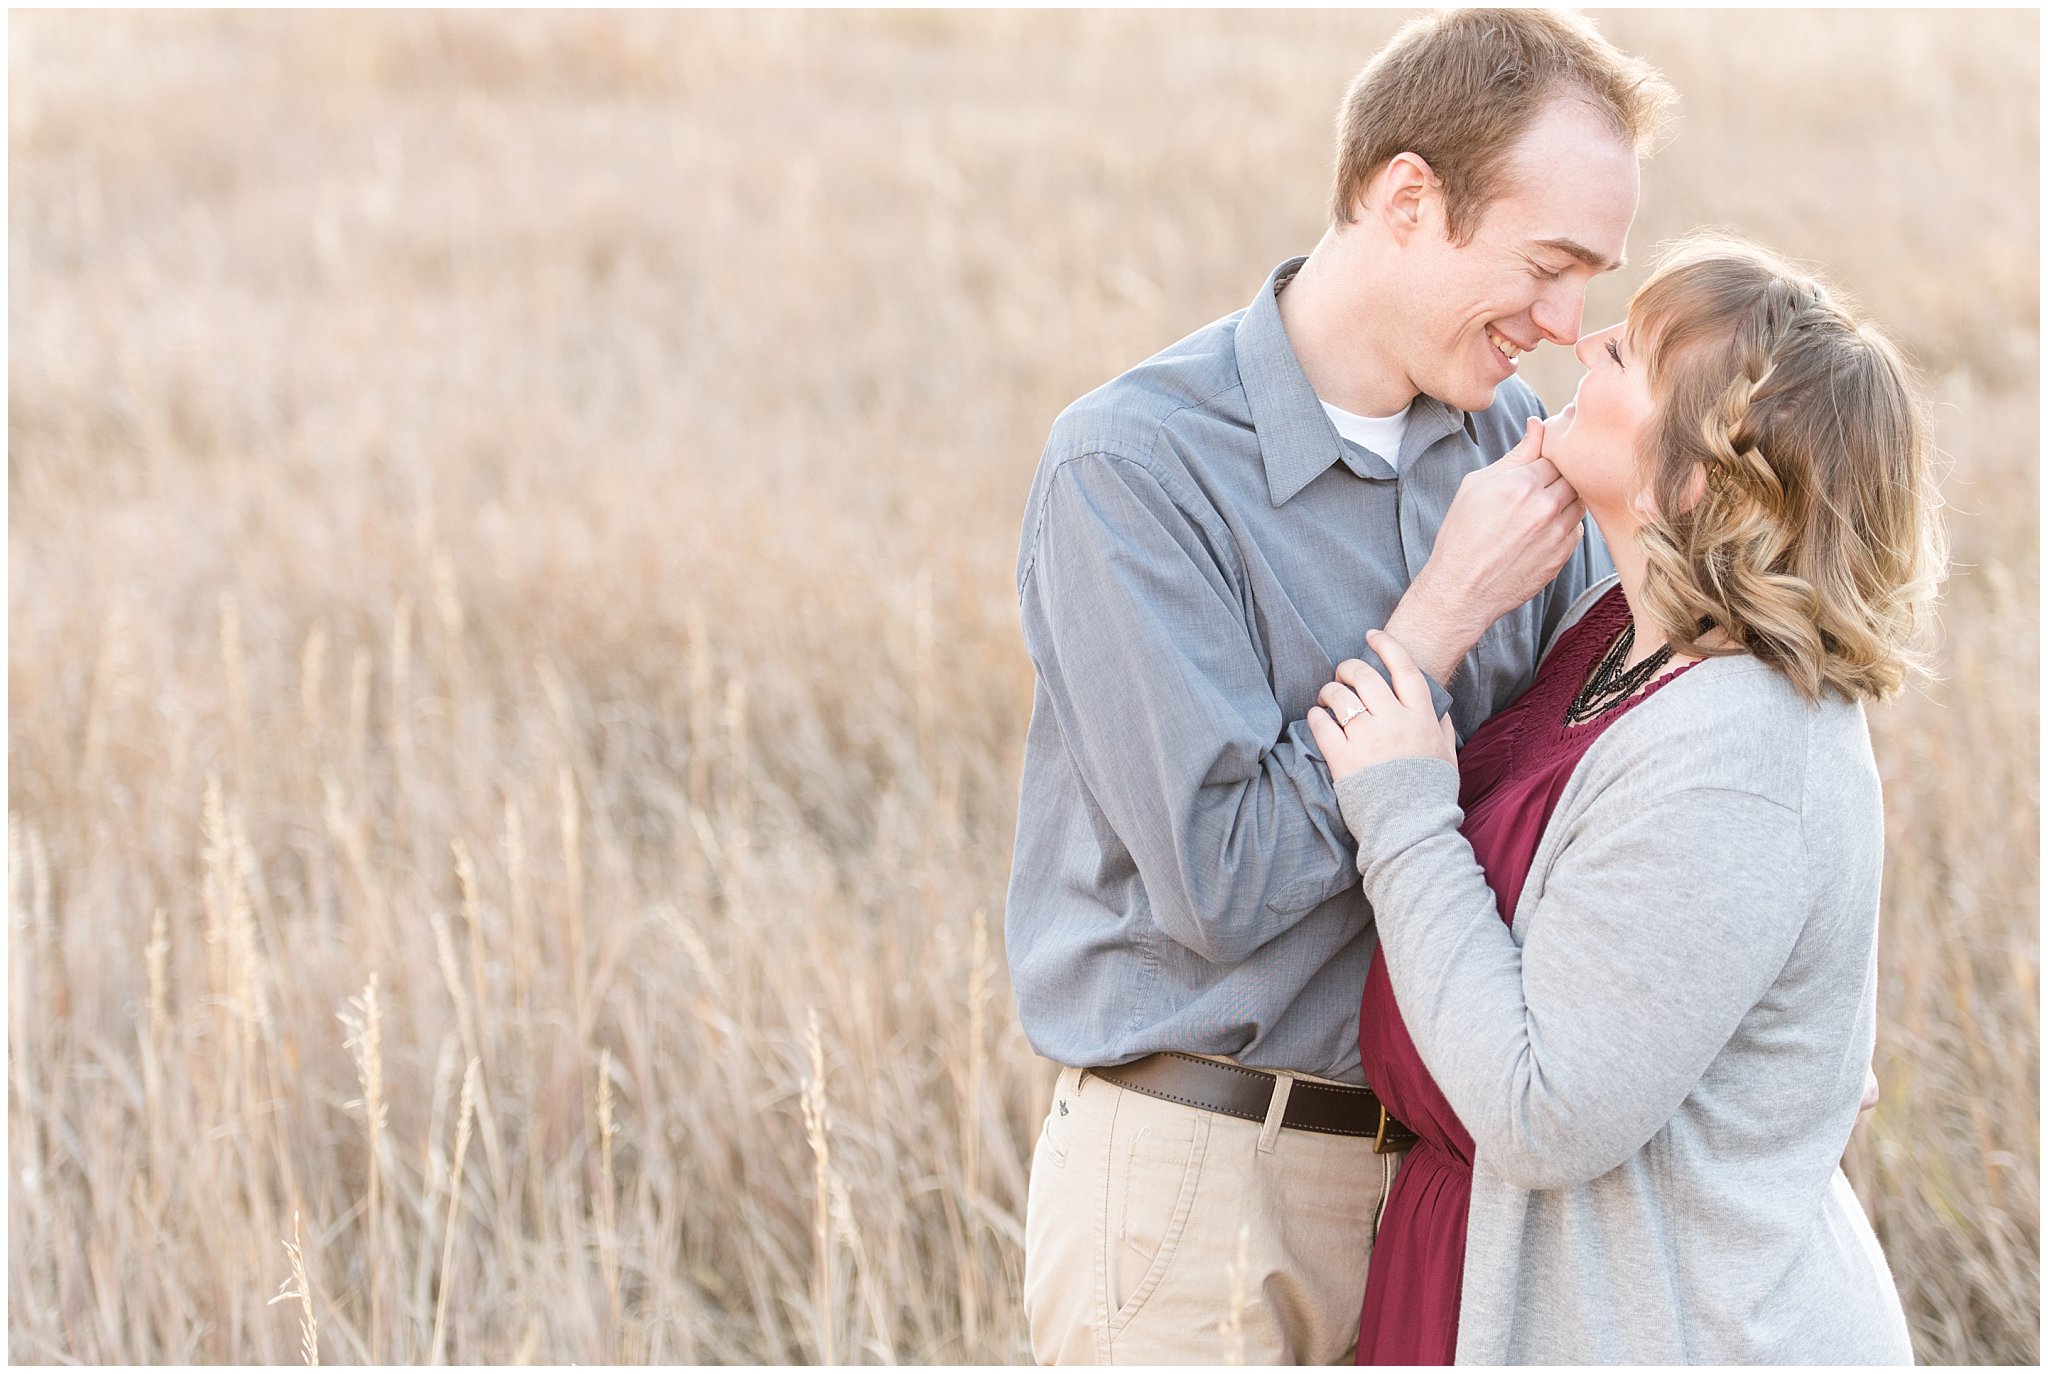 Guy lifting girls chin for a kiss | Davis County Fall Engagement | Utah Wedding Photographers | Jessie and Dallin